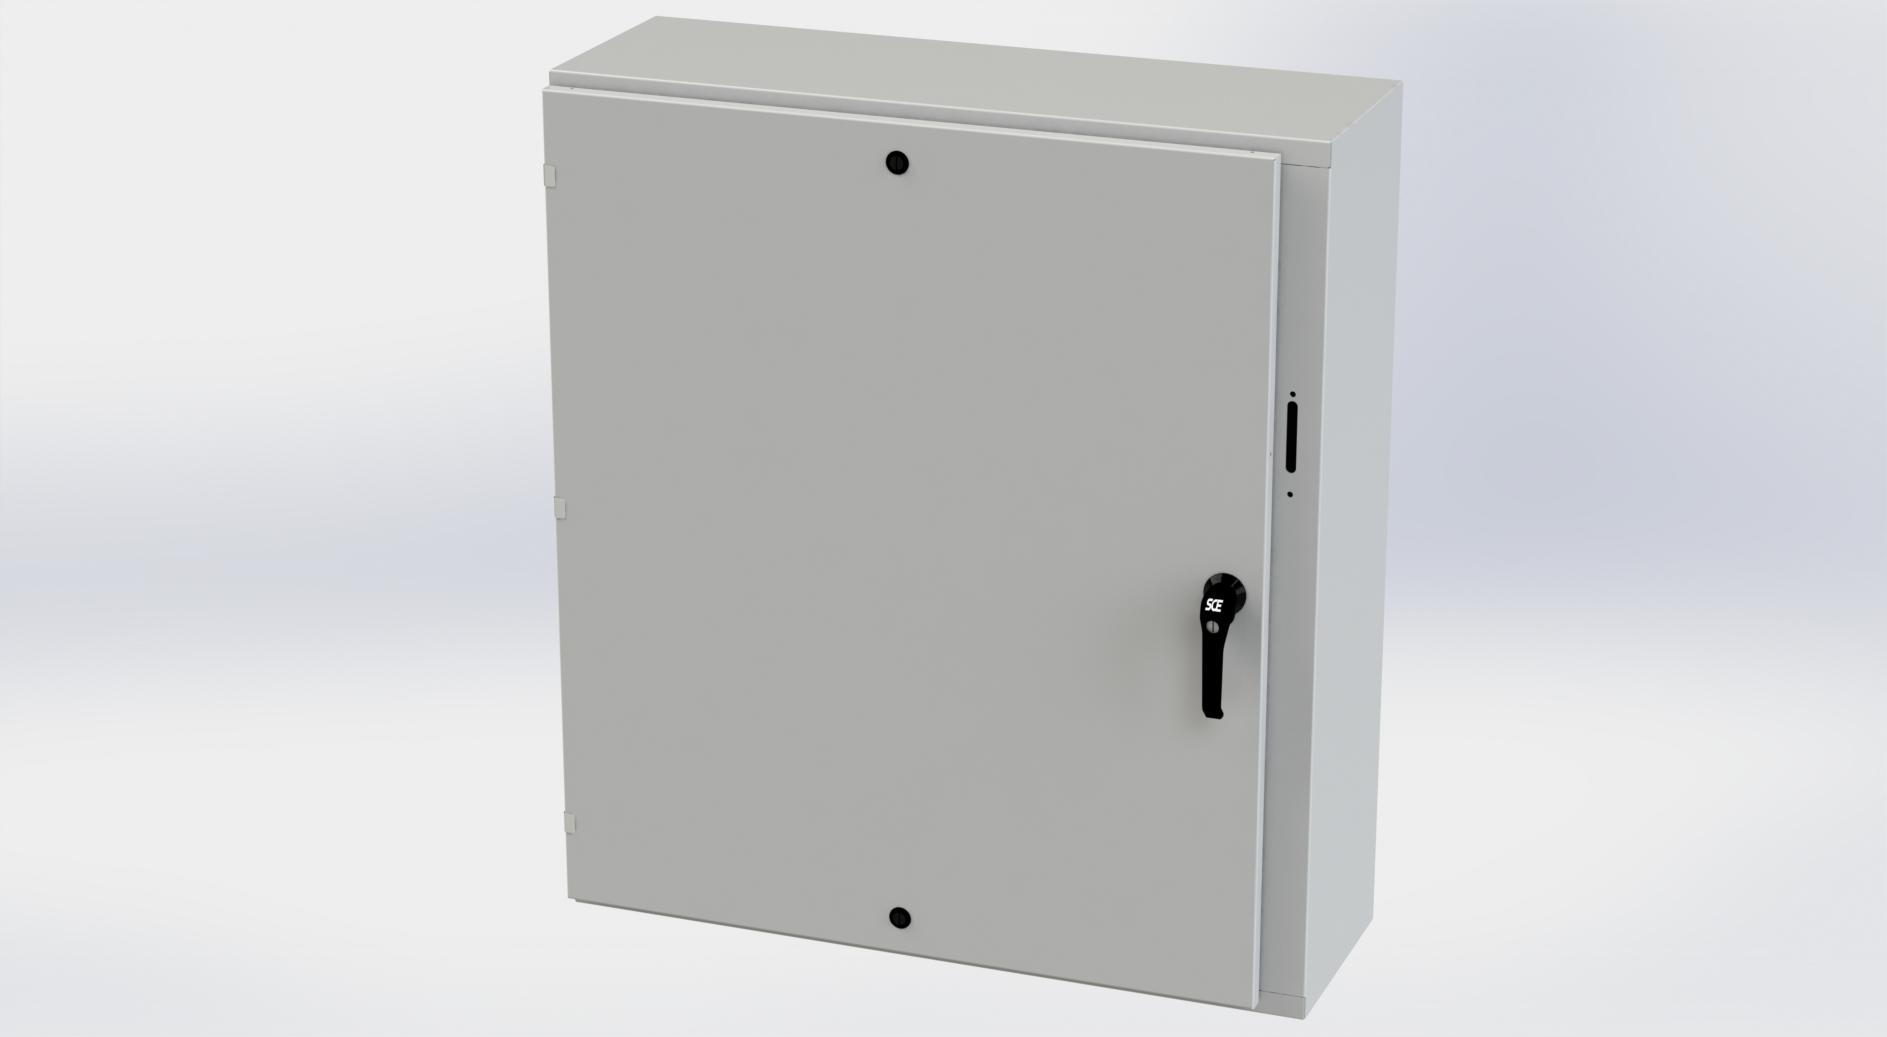 Saginaw Control SCE-42XEL3712LPLG XEL LP Enclosure, Height:42.00", Width:37.38", Depth:12.00", RAL 7035 gray powder coating inside and out. Optional sub-panels are powder coated white.